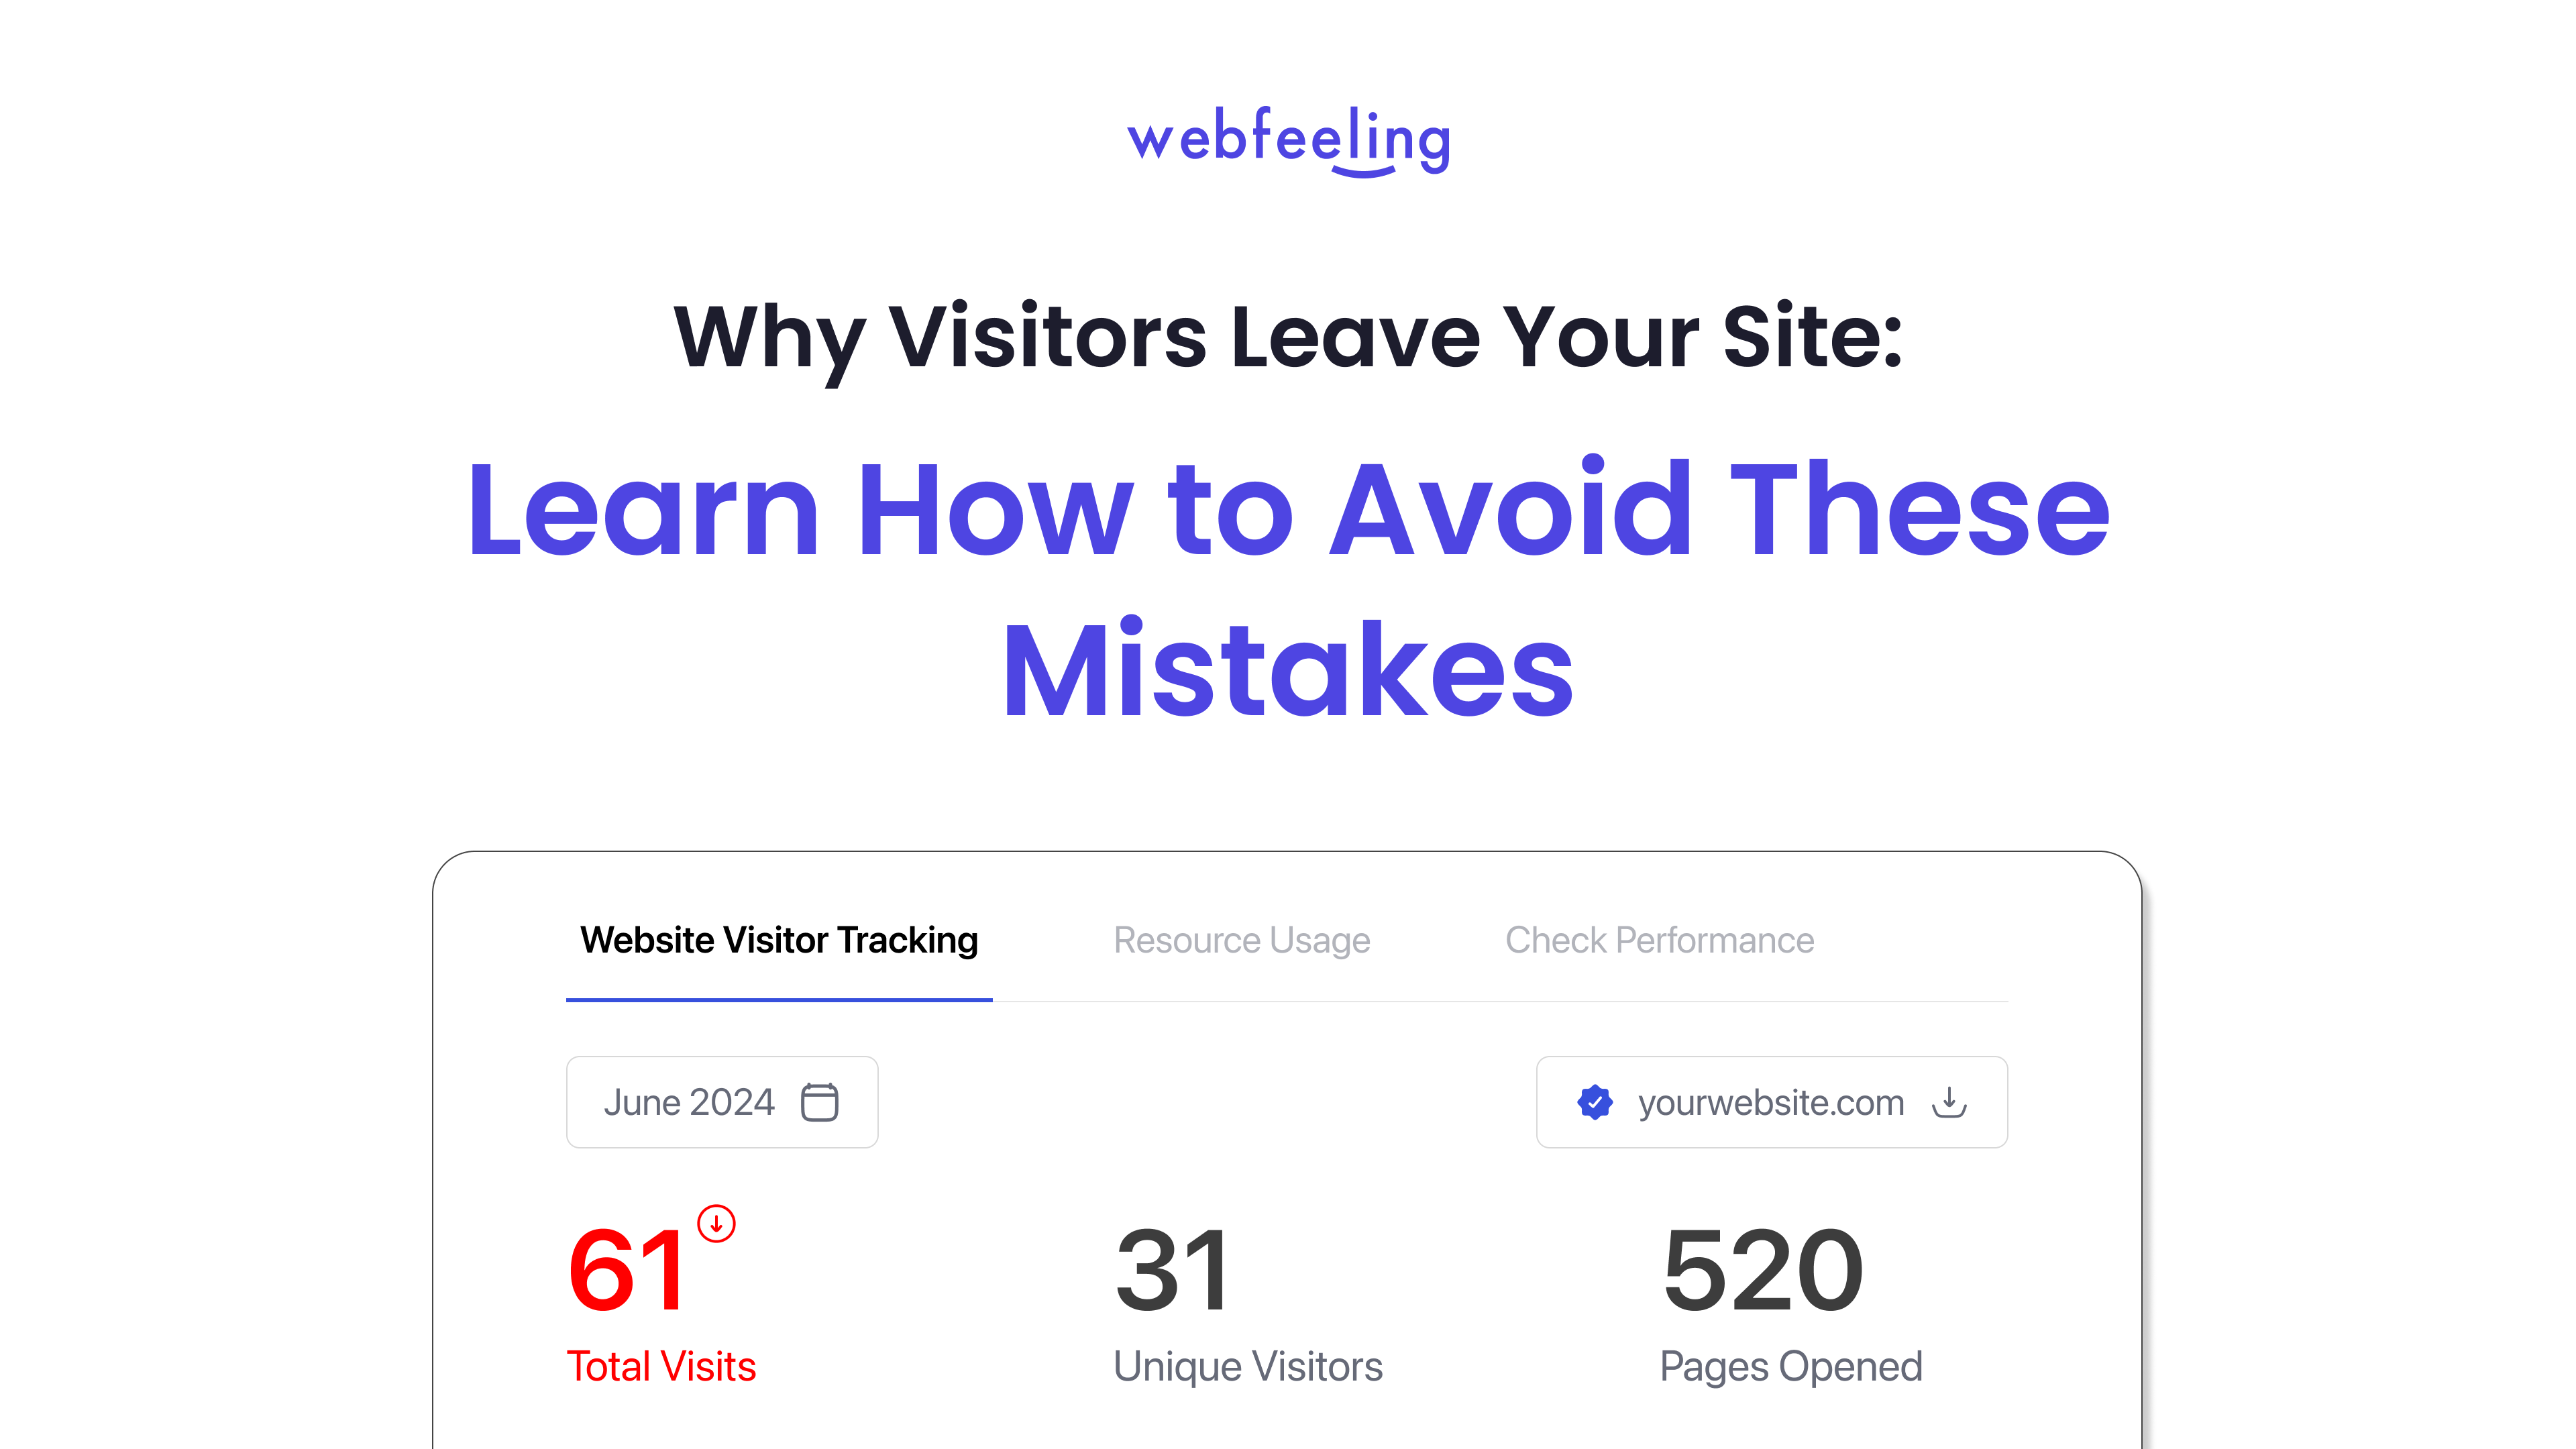 Why Visitors Leave Your Site: Learn How to Avoid These Mistakes